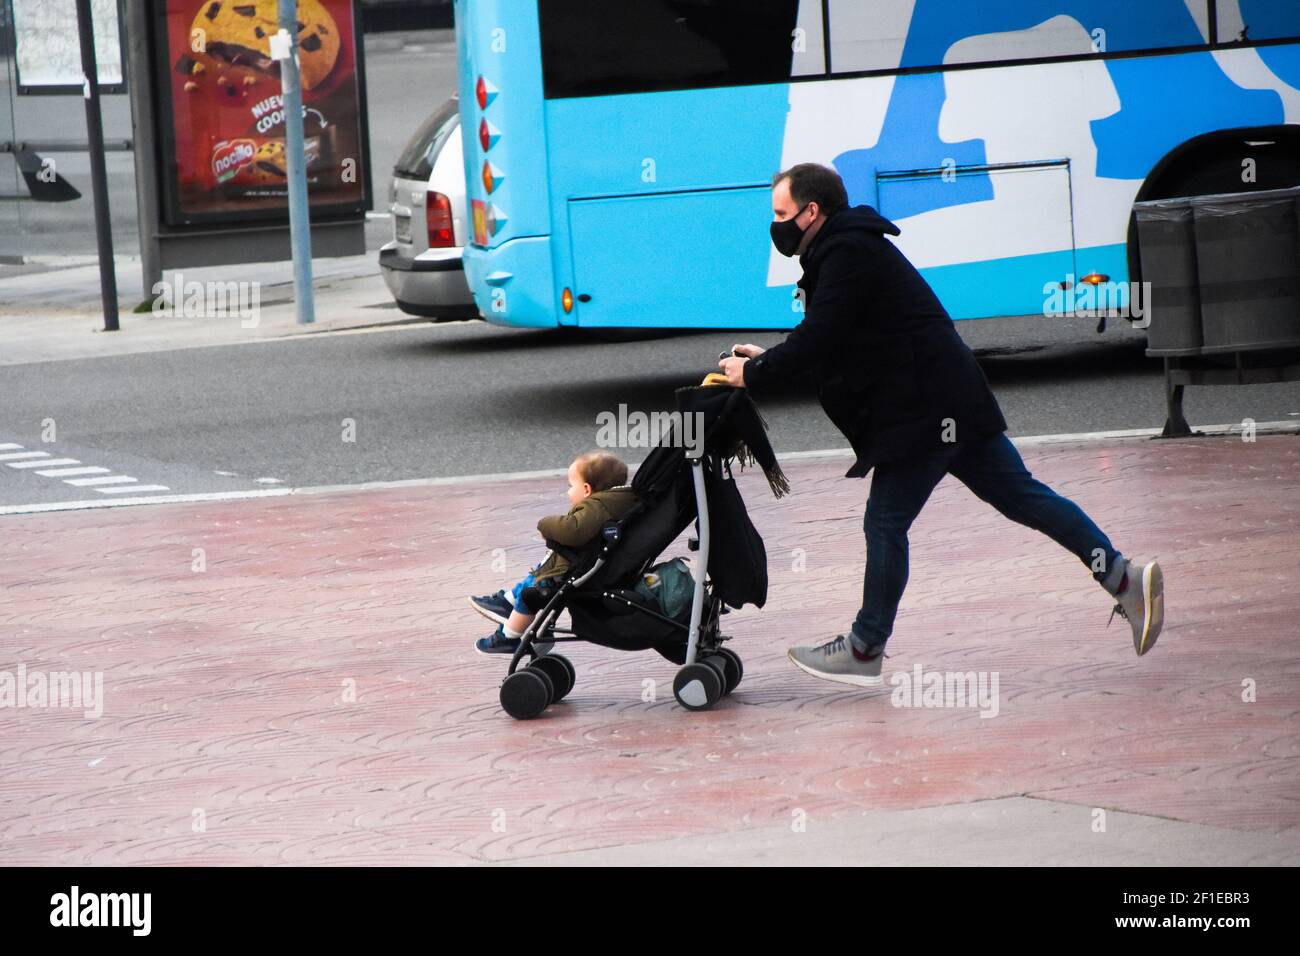 Stressed father pushing a stroller with his son inside. He is running because he is late. Family, lifestyle, people, moment, everyday, real life. Stock Photo